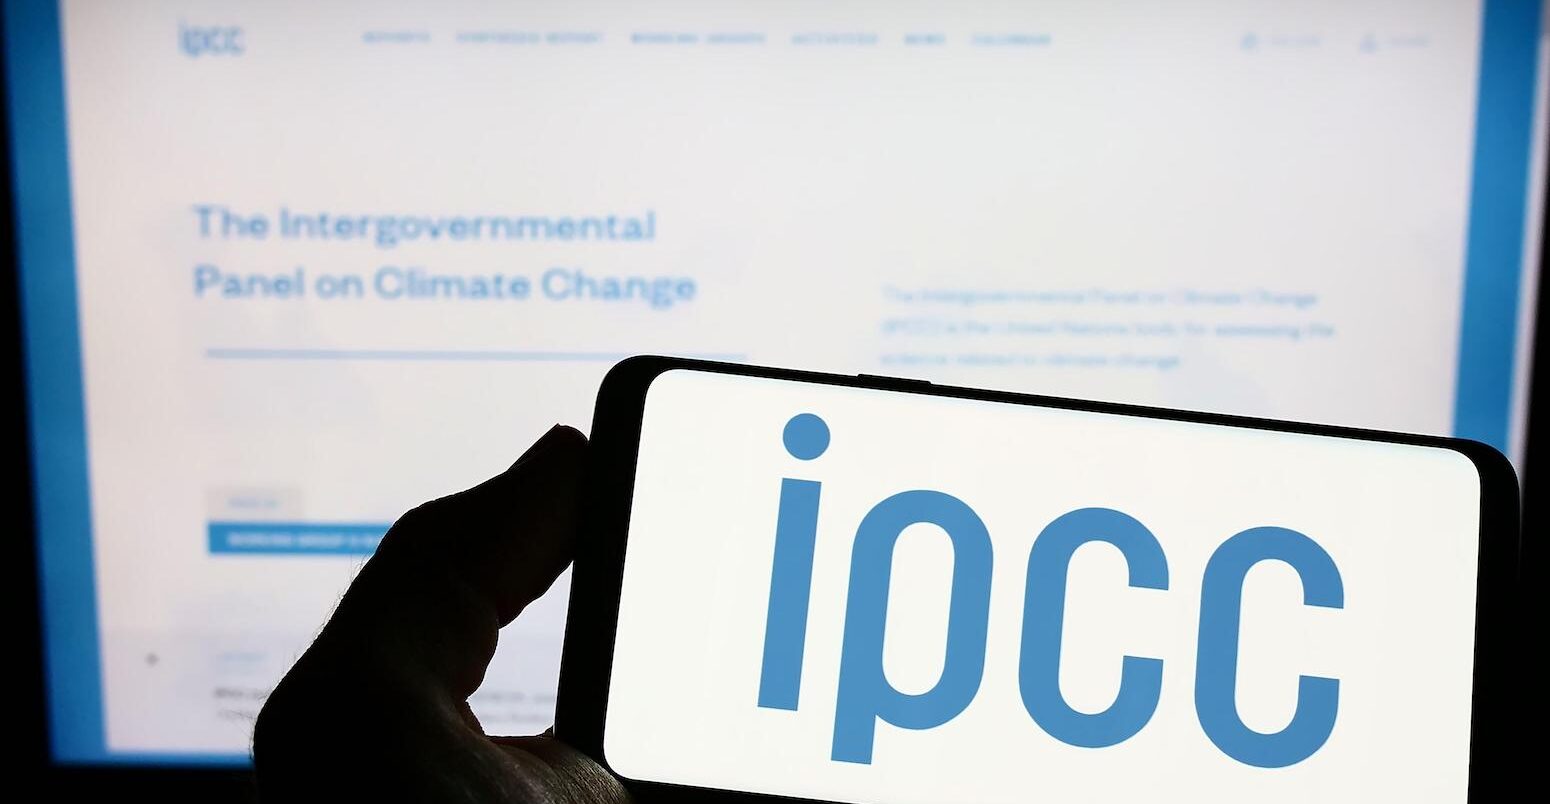 Person holding smartphone with logo of Intergovernmental Panel on Climate Change (IPCC) on screen in front of website. Focus on phone display.